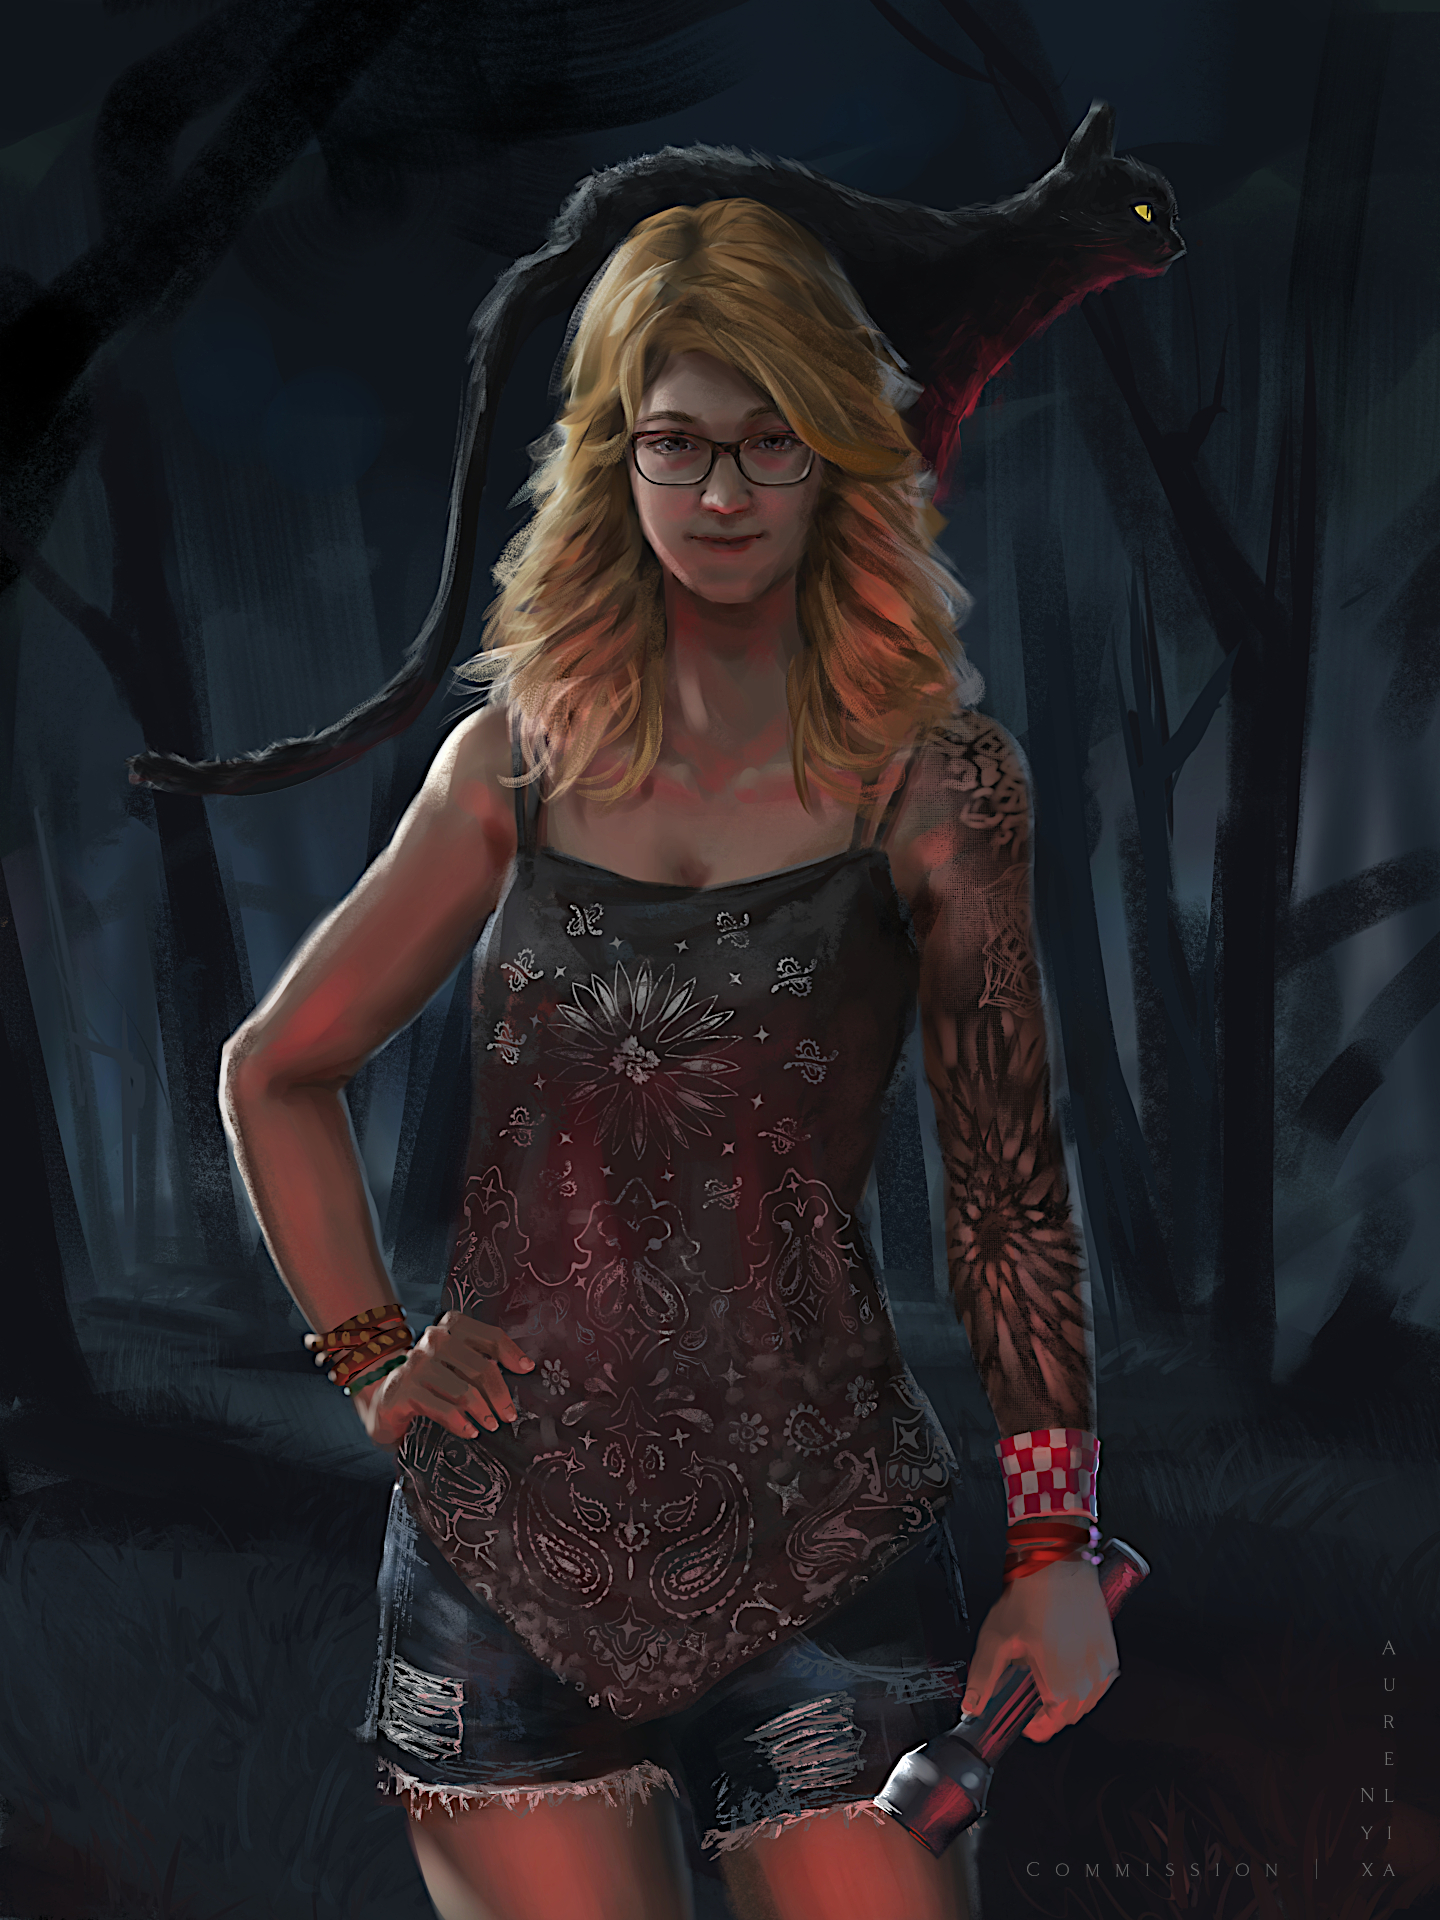 Commission - Client's as Kate from DbD by nyxaurelia on DeviantArt